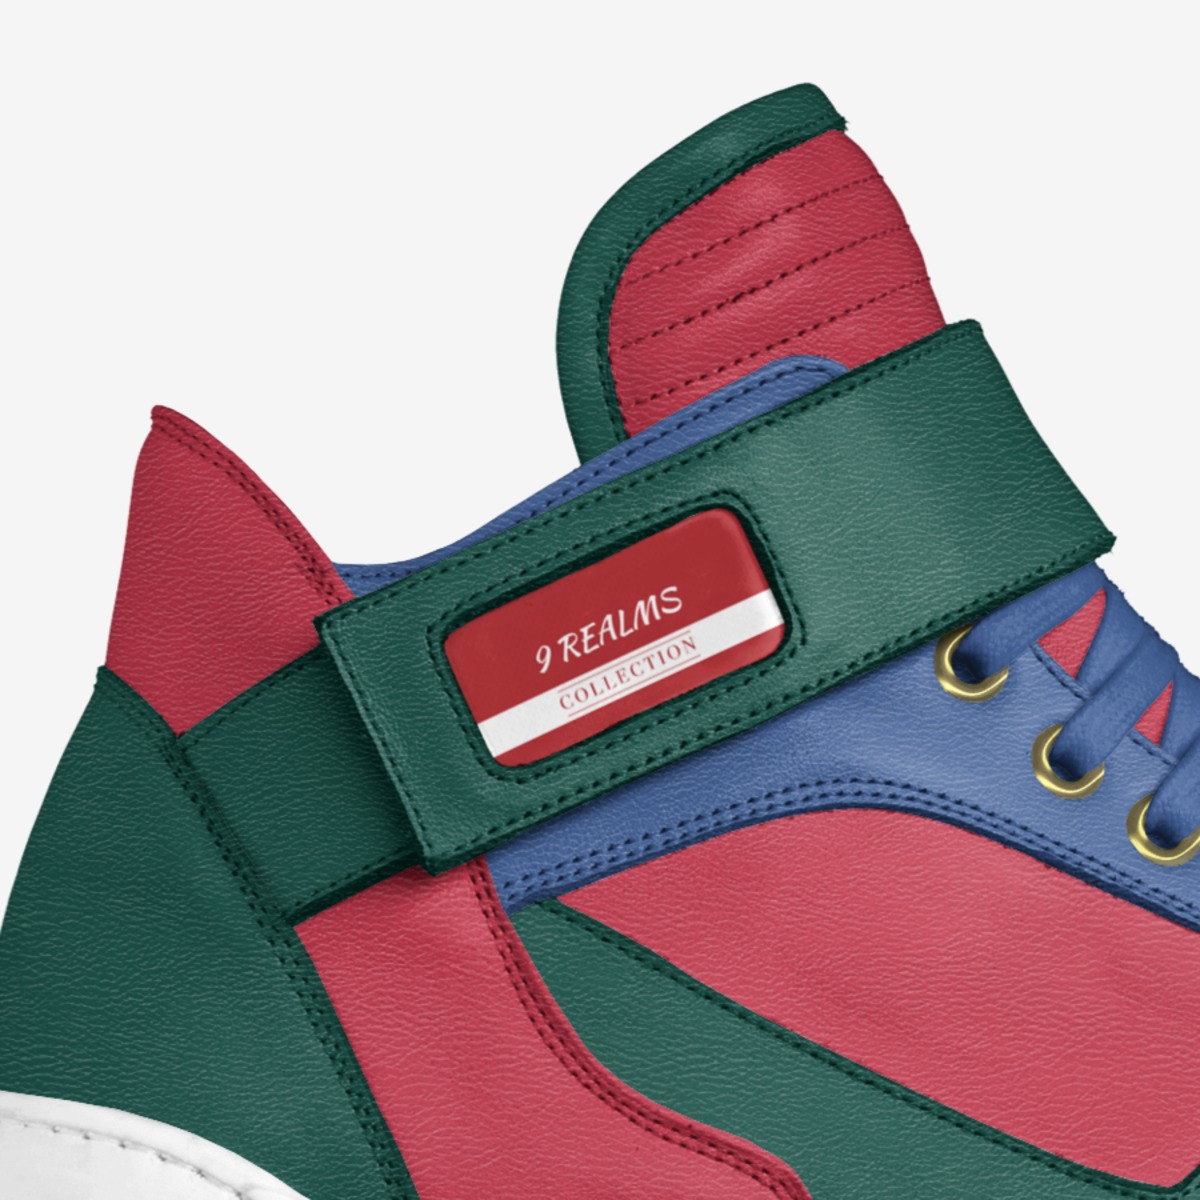 9 REALMS | A Custom Shoe concept by Michael Brown